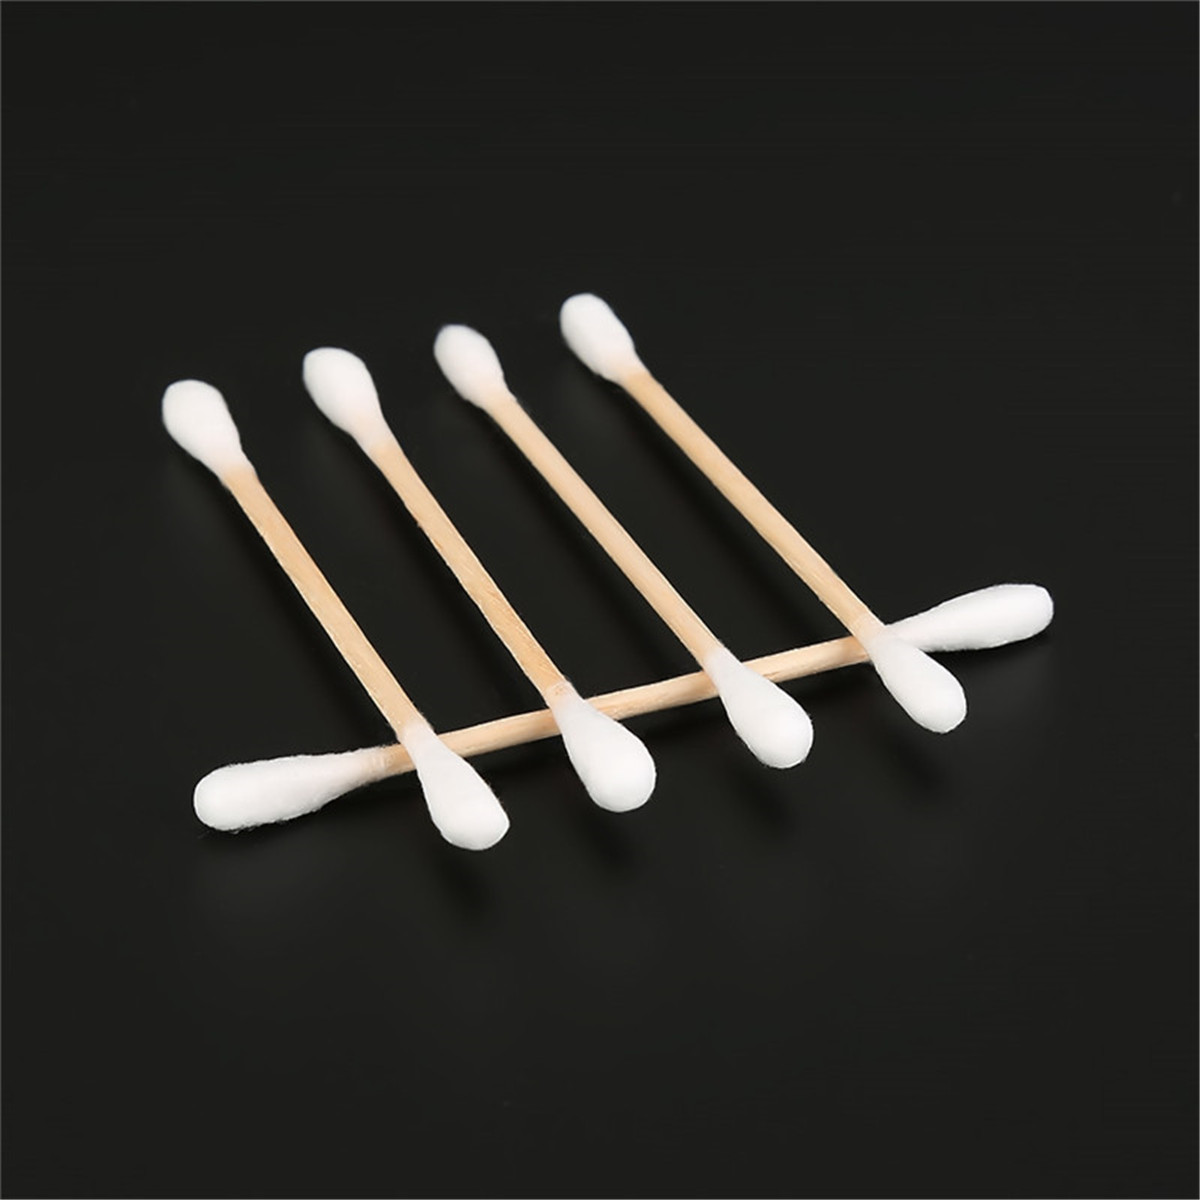 100x-Cotton-Swabs-Swab-Applicator-Q-Tips-Double-Head-Wooden-Stick-Cleaning-Tools-1582736-6